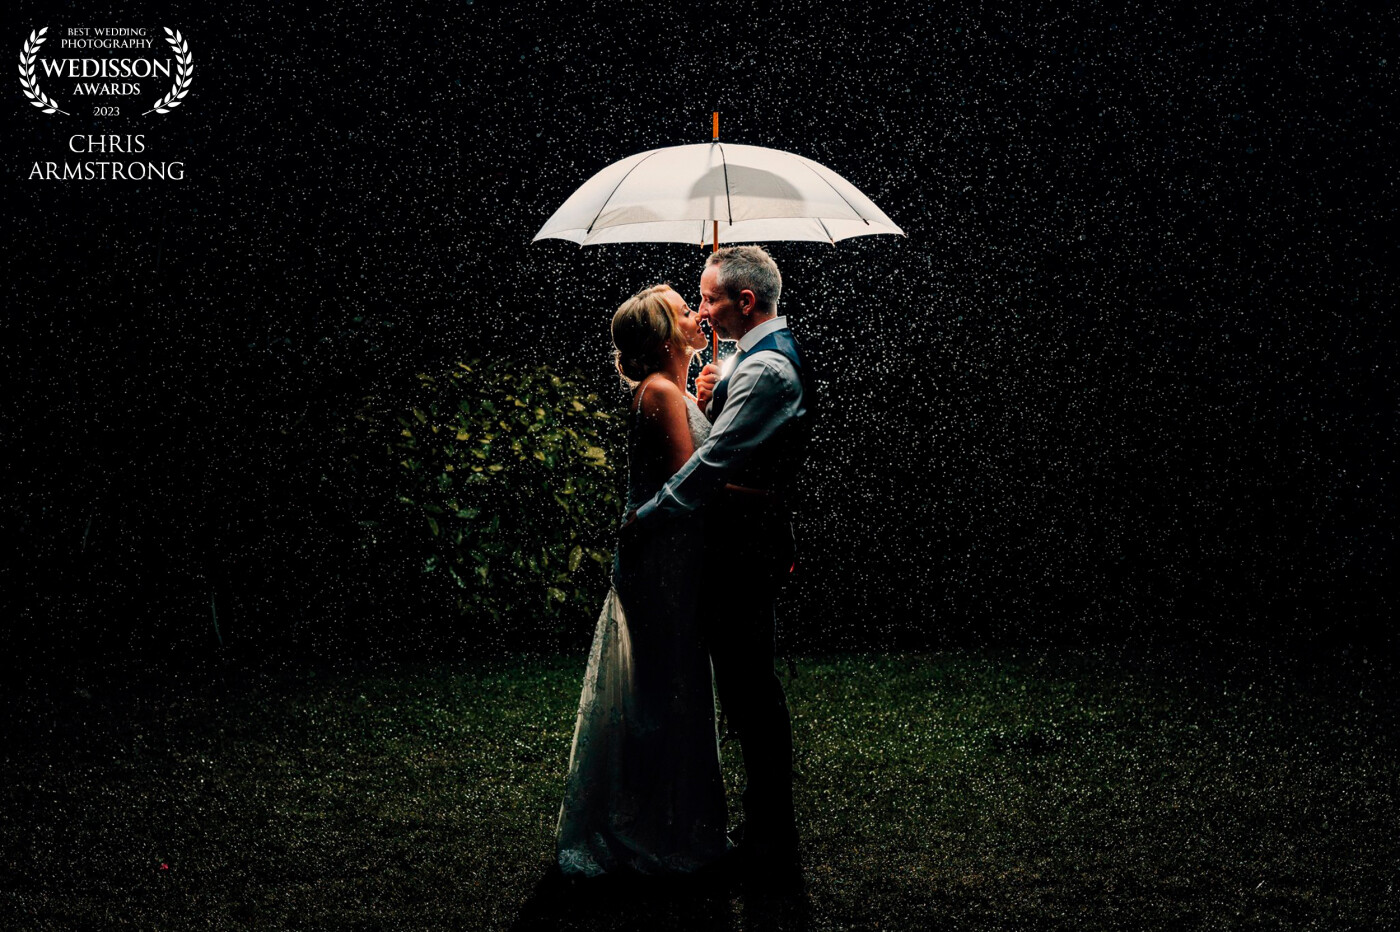 After a very rainy day, I knew I needed o get something special for Katie and Steve. So embracing the rain, we popped outside and grabbed this shot!